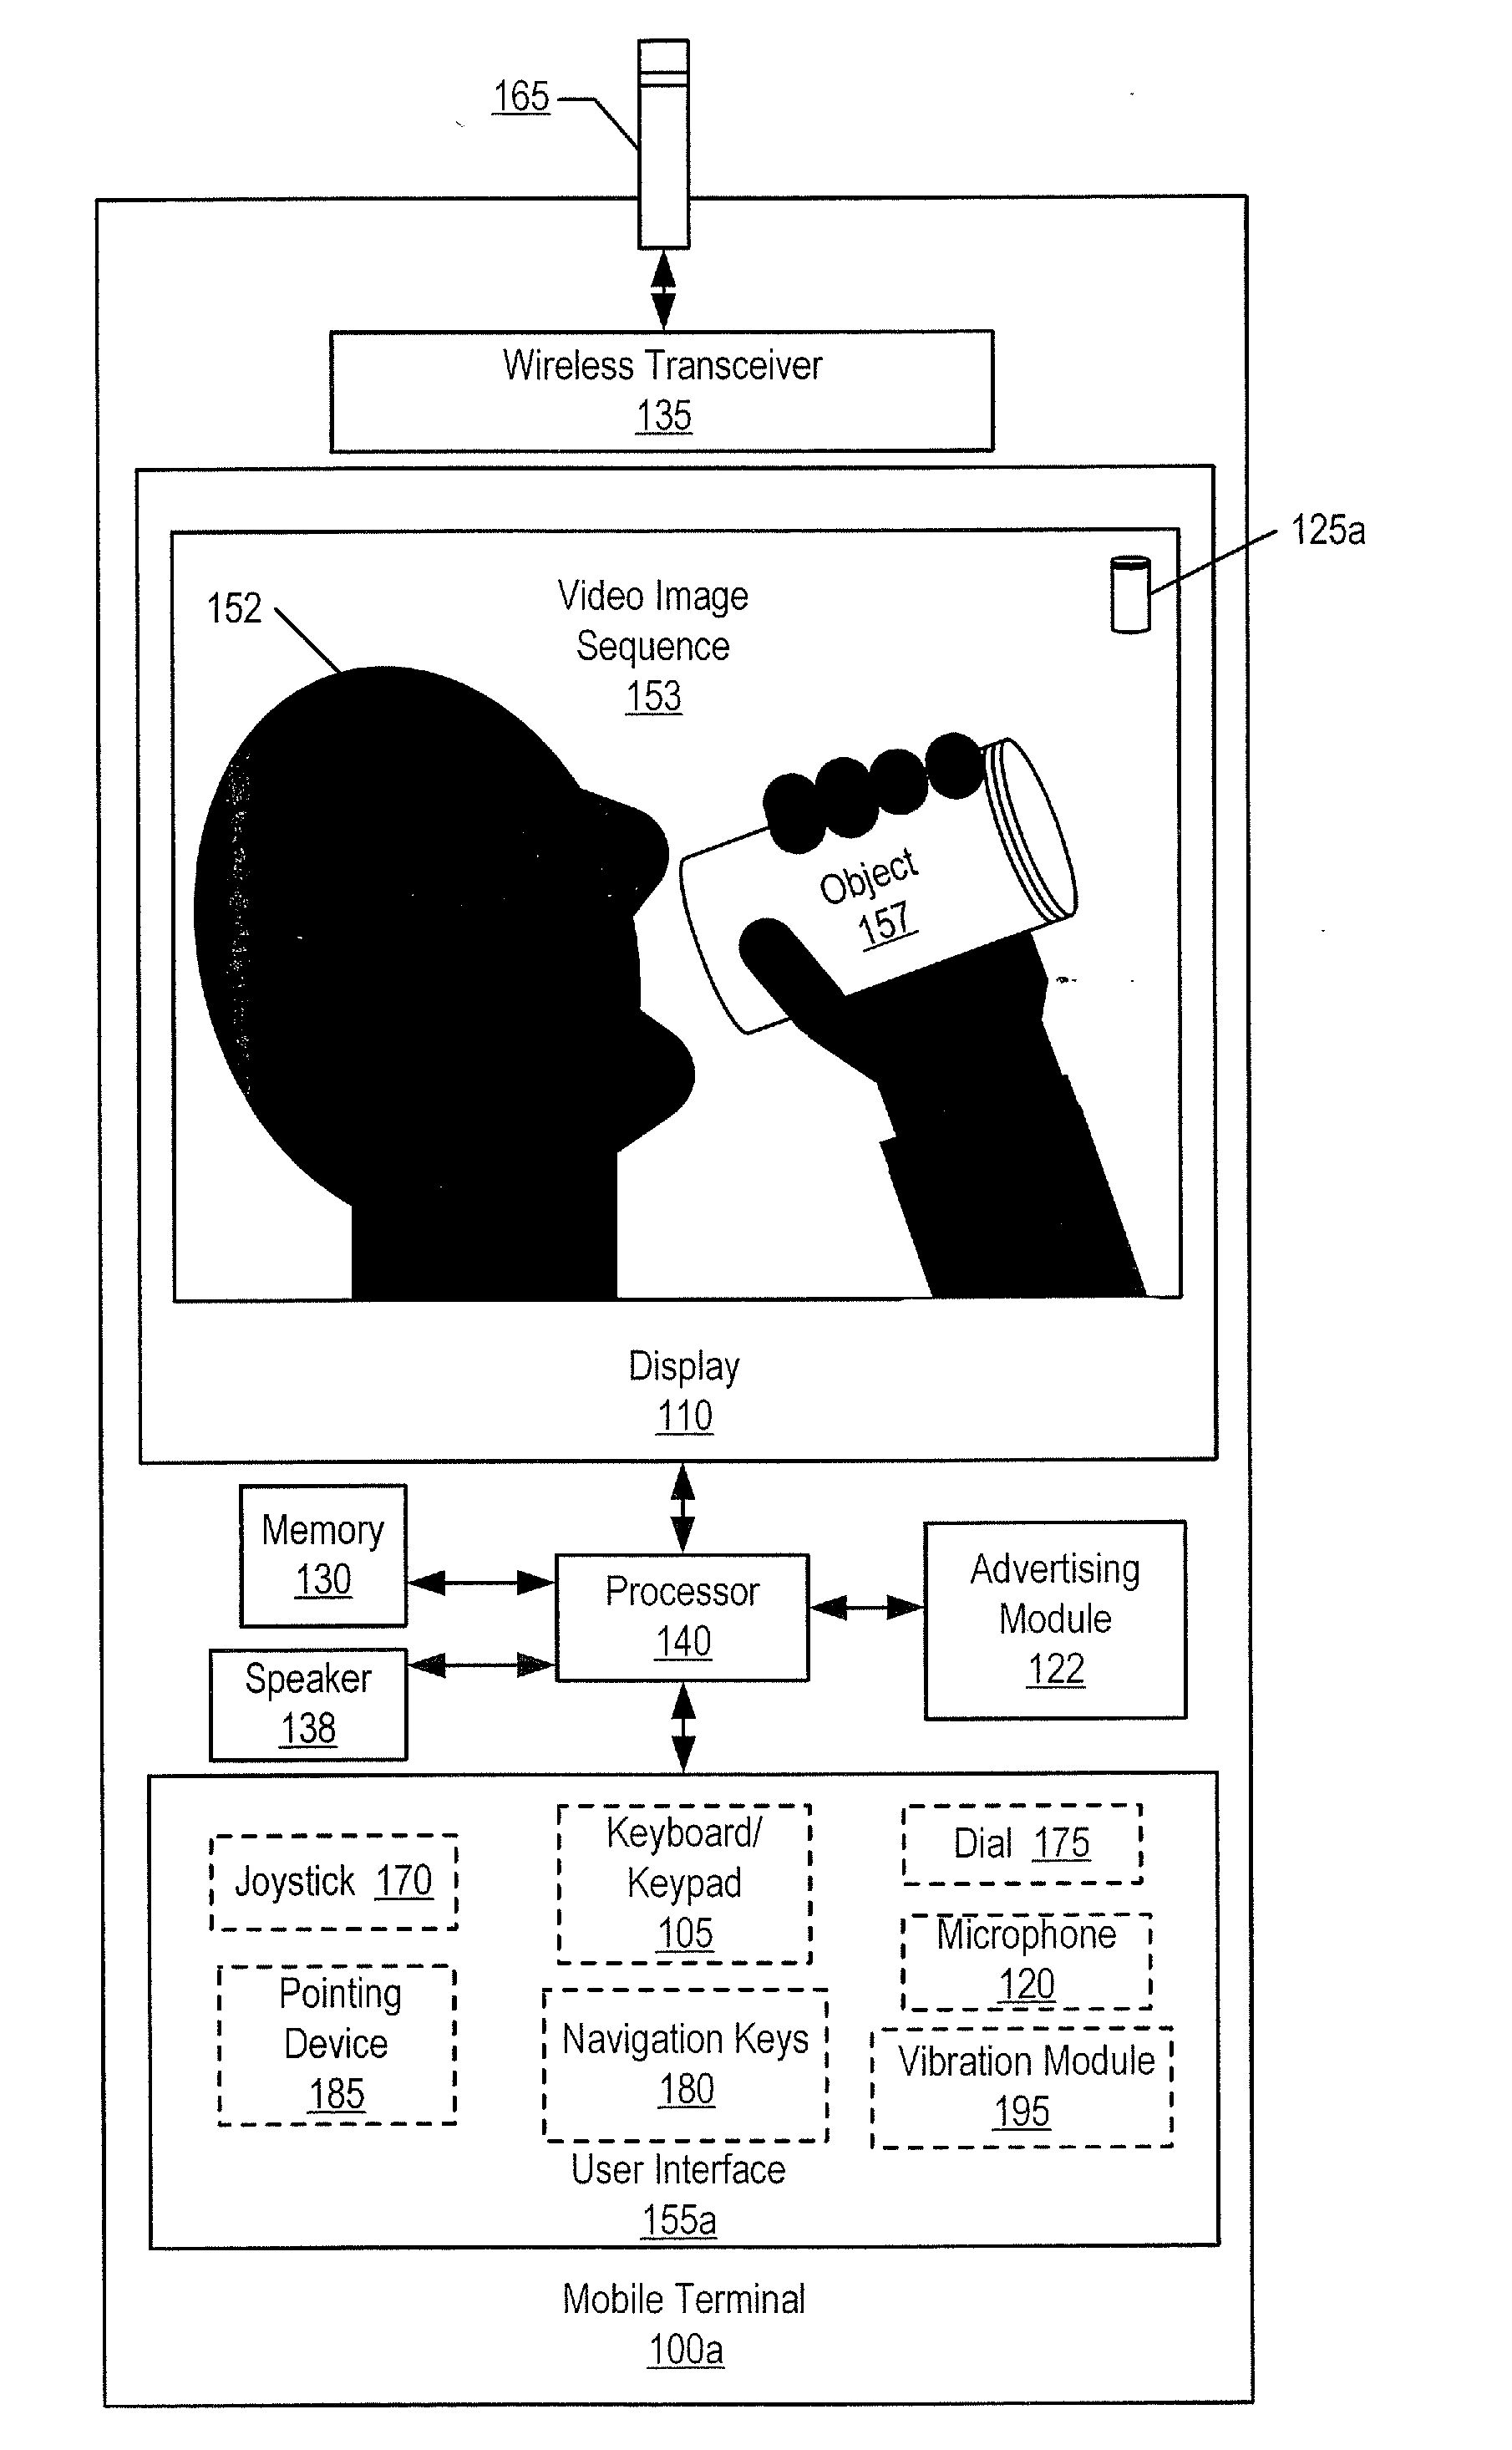 Methods, devices, and computer program products for providing unobtrusive video advertising content